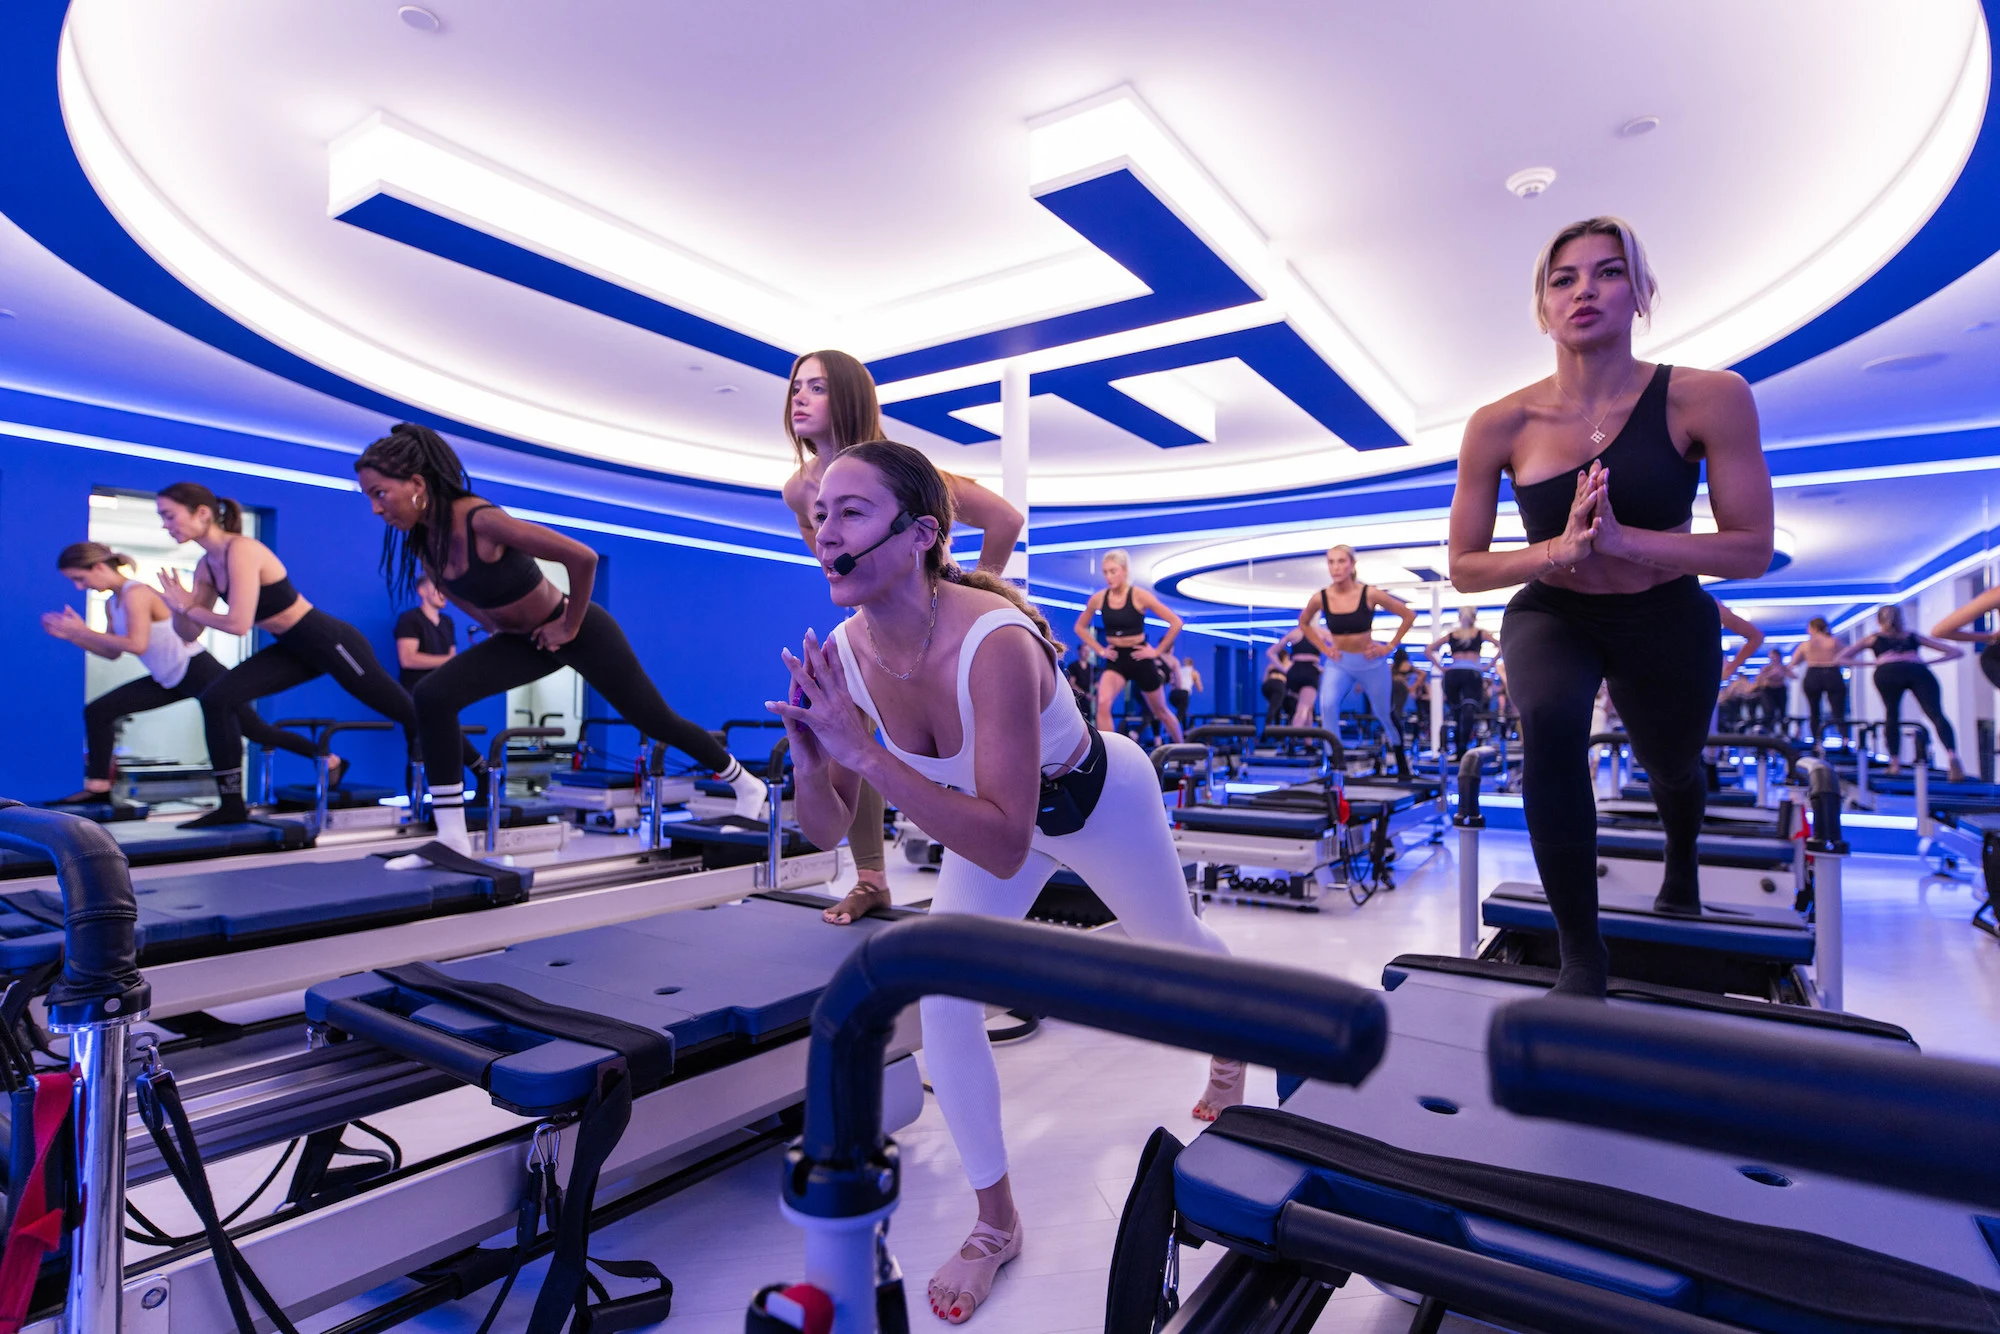 JetSet Pilates Coming to SoHo as Fitness Brand Keeps Expanding